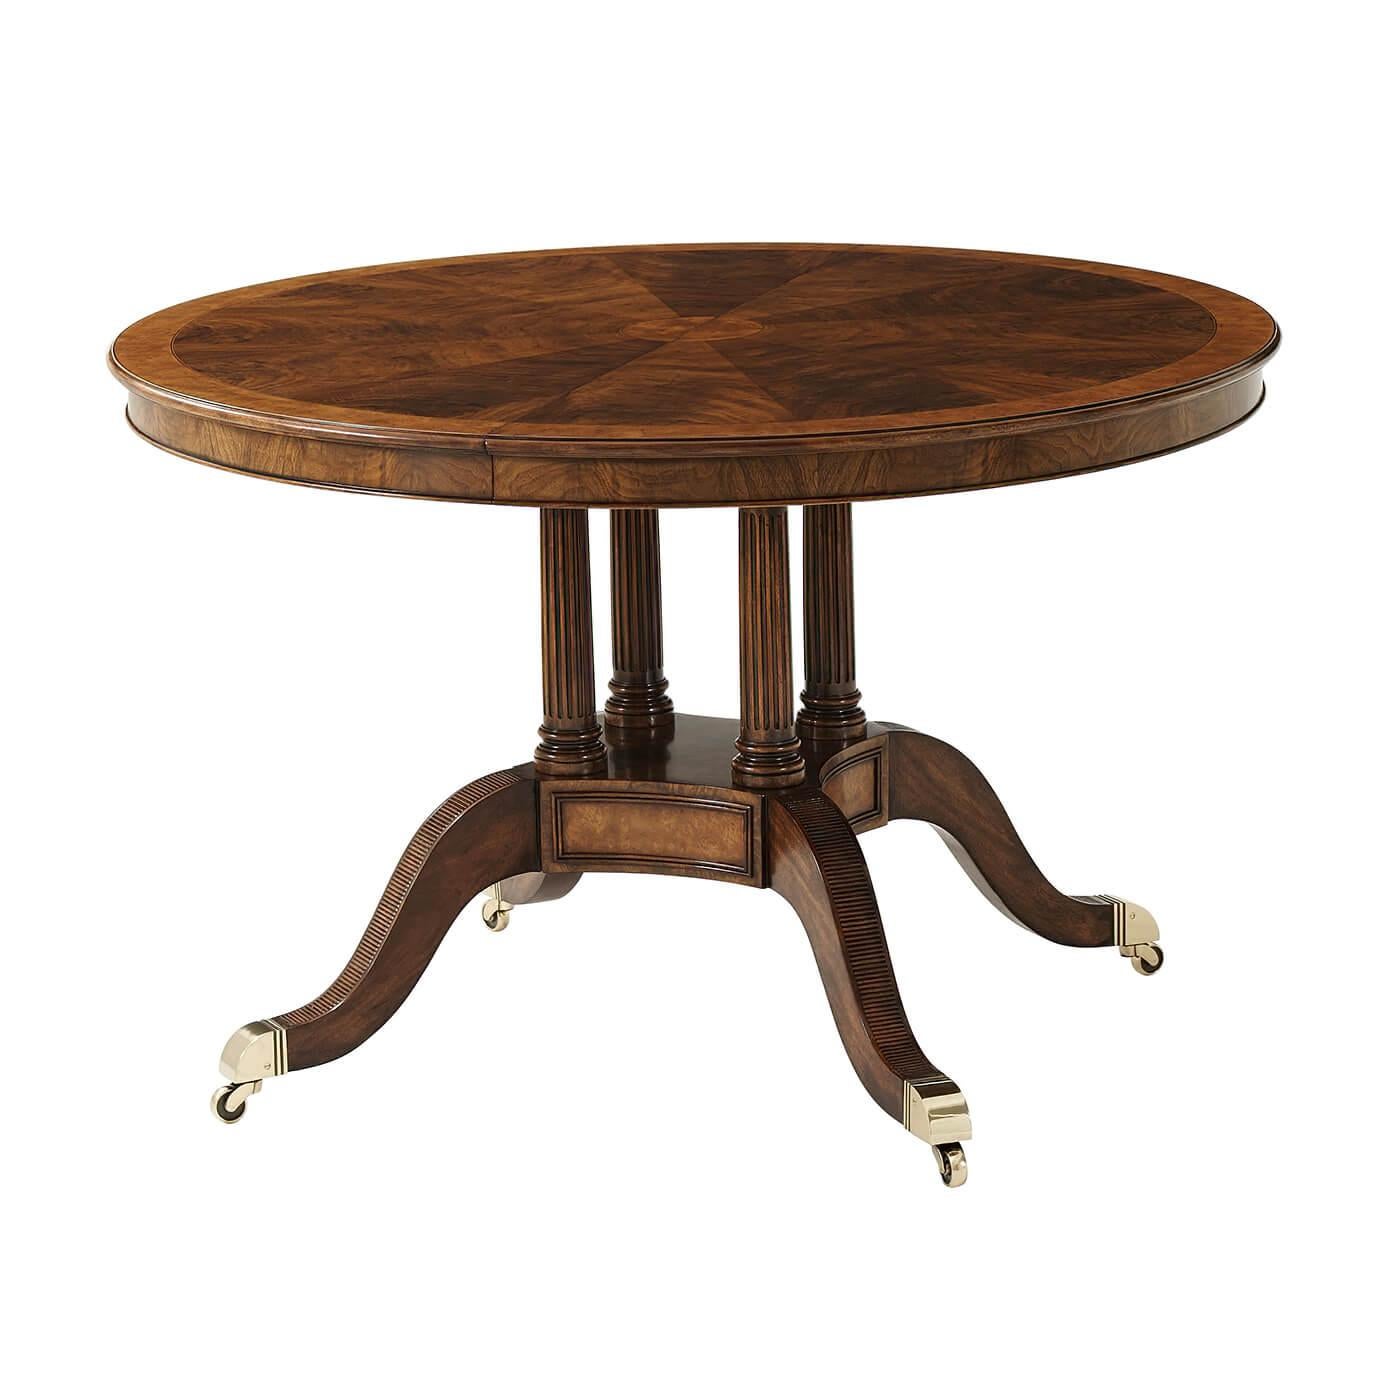 A fine extending walnut veneered and yew burl banded dining table, the circular top opening to accommodate an additional leaf and extending to a D end oval, on four turned and fluted column supports issuing from a plinth base with downswept mahogany